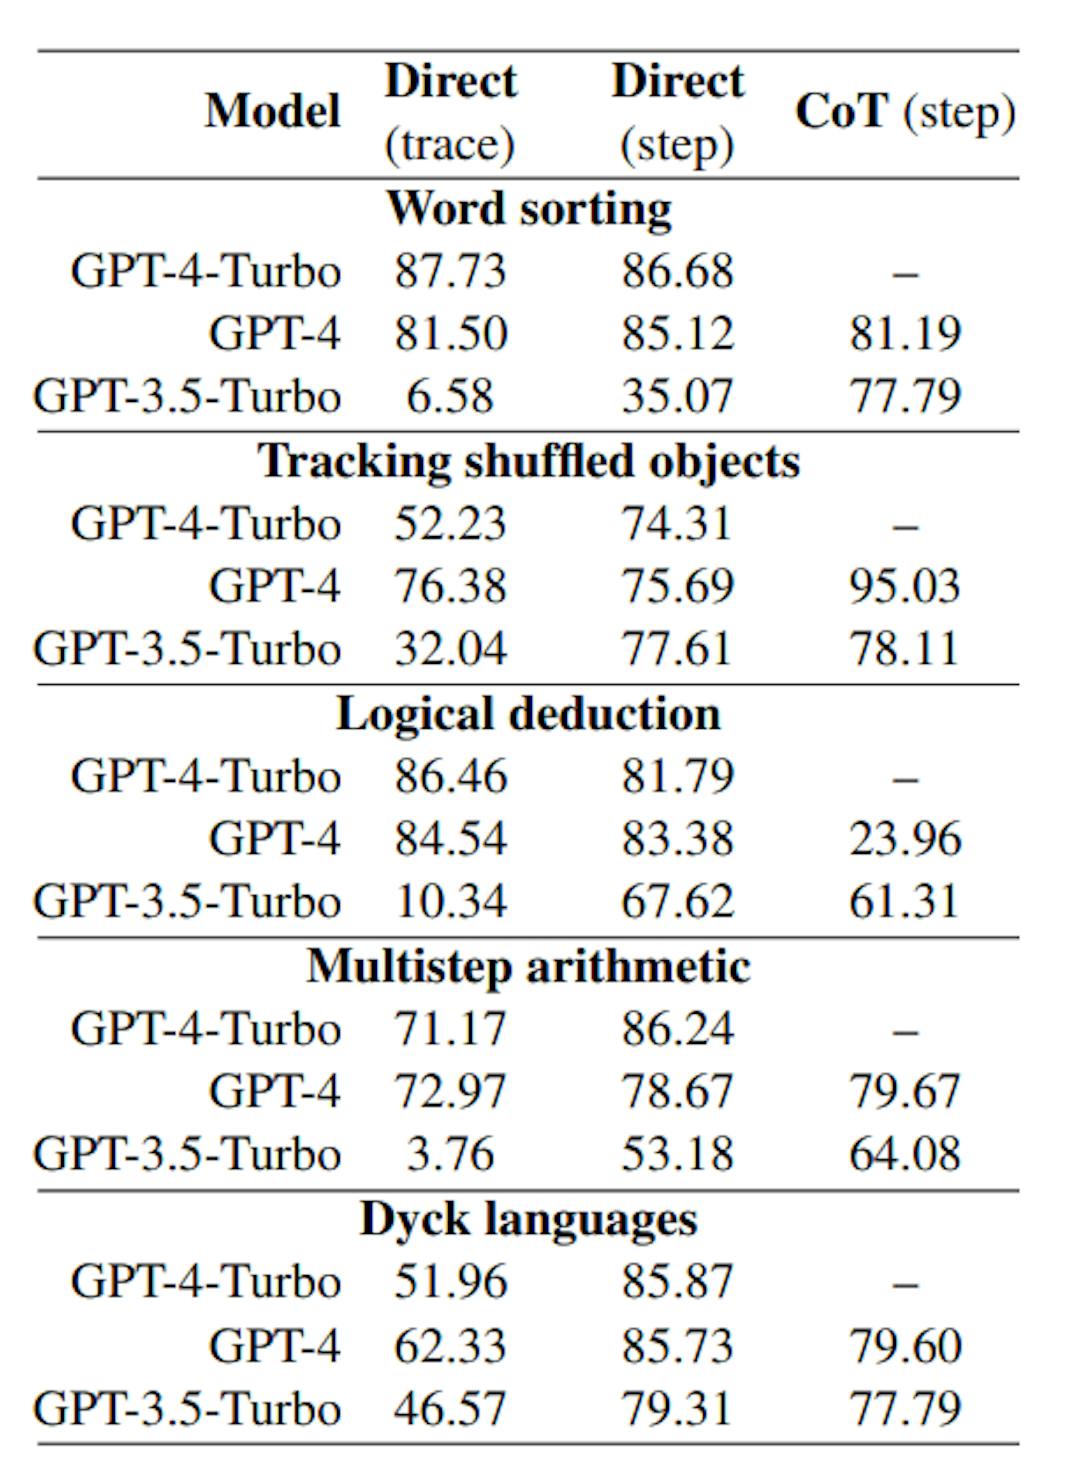 Table 5: Weighted average F1 scores for predicted correctnessans of traces across 5 tasks. Baseline is 78 if we only select the incorrectans label. As in Table 4, traces for the Dyck languages task has been sampled to match the ratio of correctans to incorrectans traces of the other tasks. See Table 3 for a full breakdown.